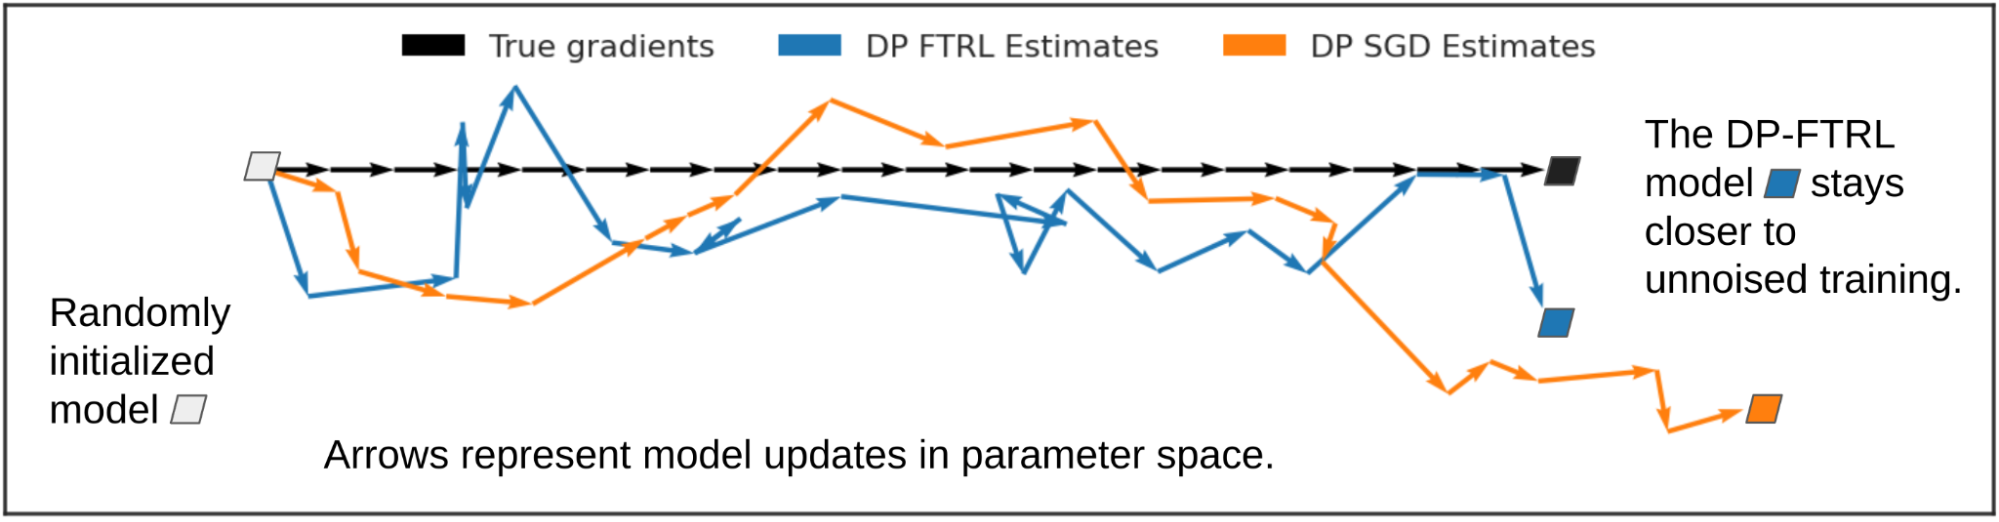 A diagram showing model updates in parameter space, comparing DP-FTRL with DP-SGD and true gradients.